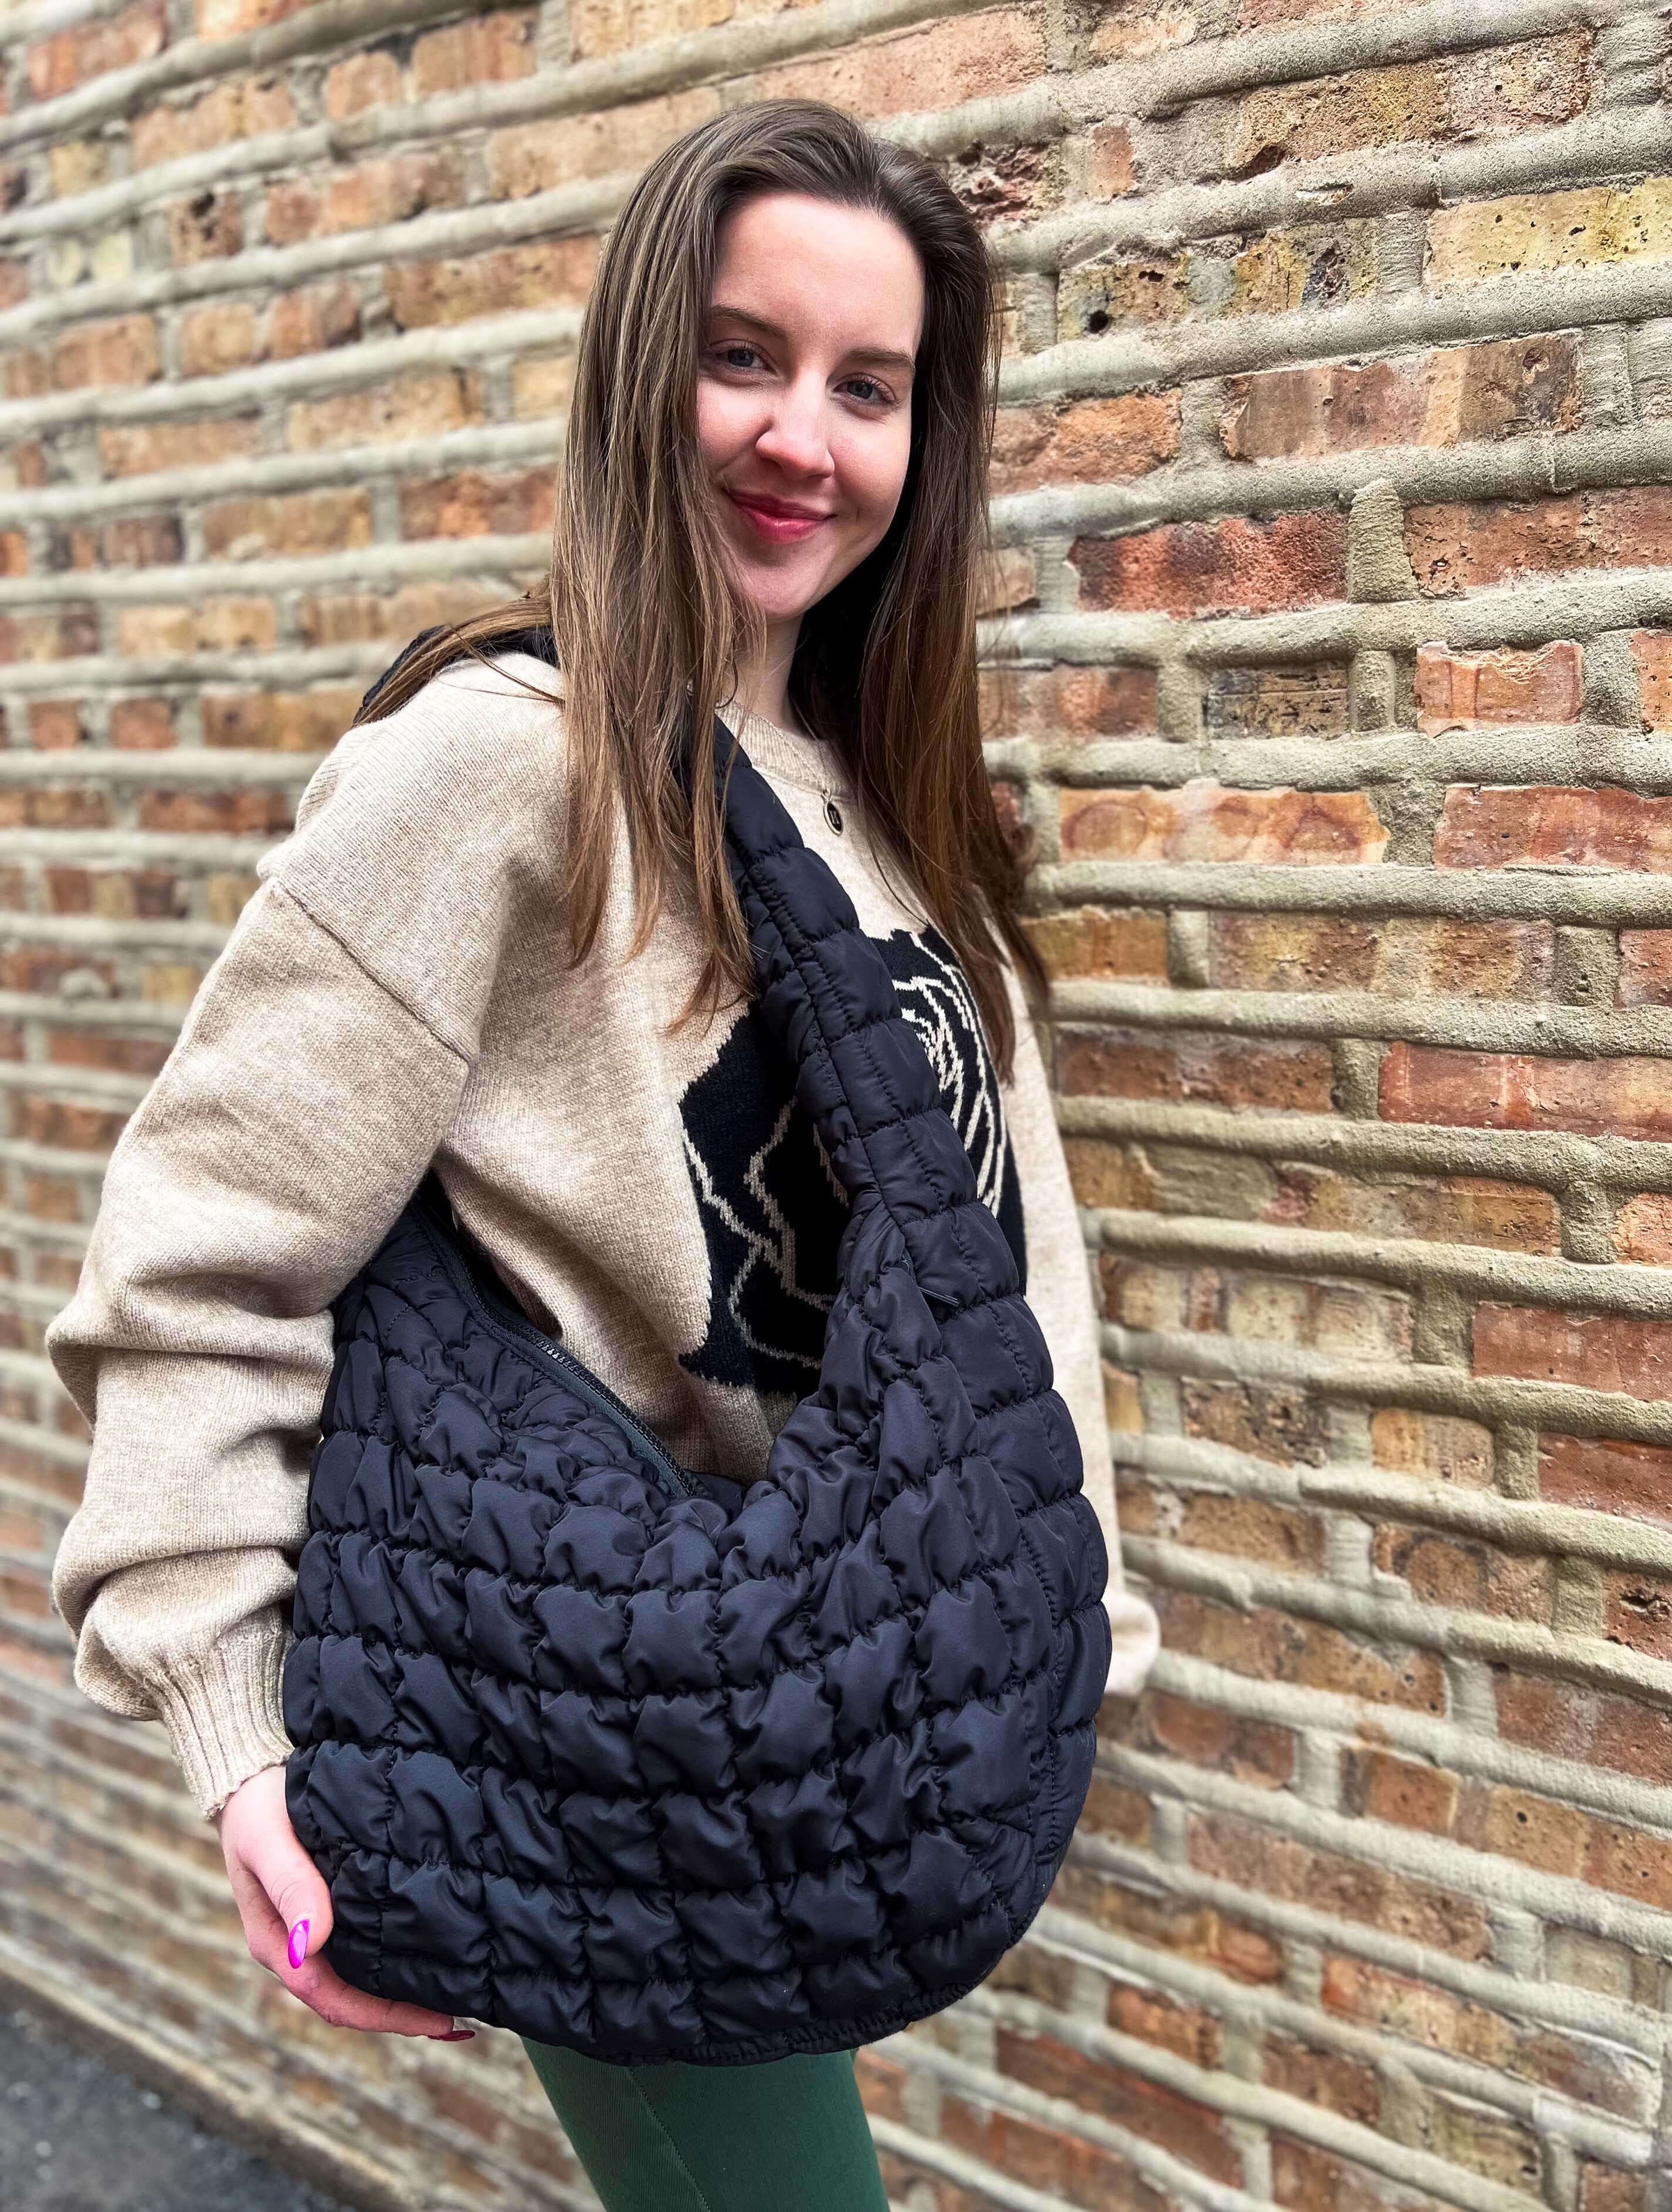 Large Quilted Bag in Black